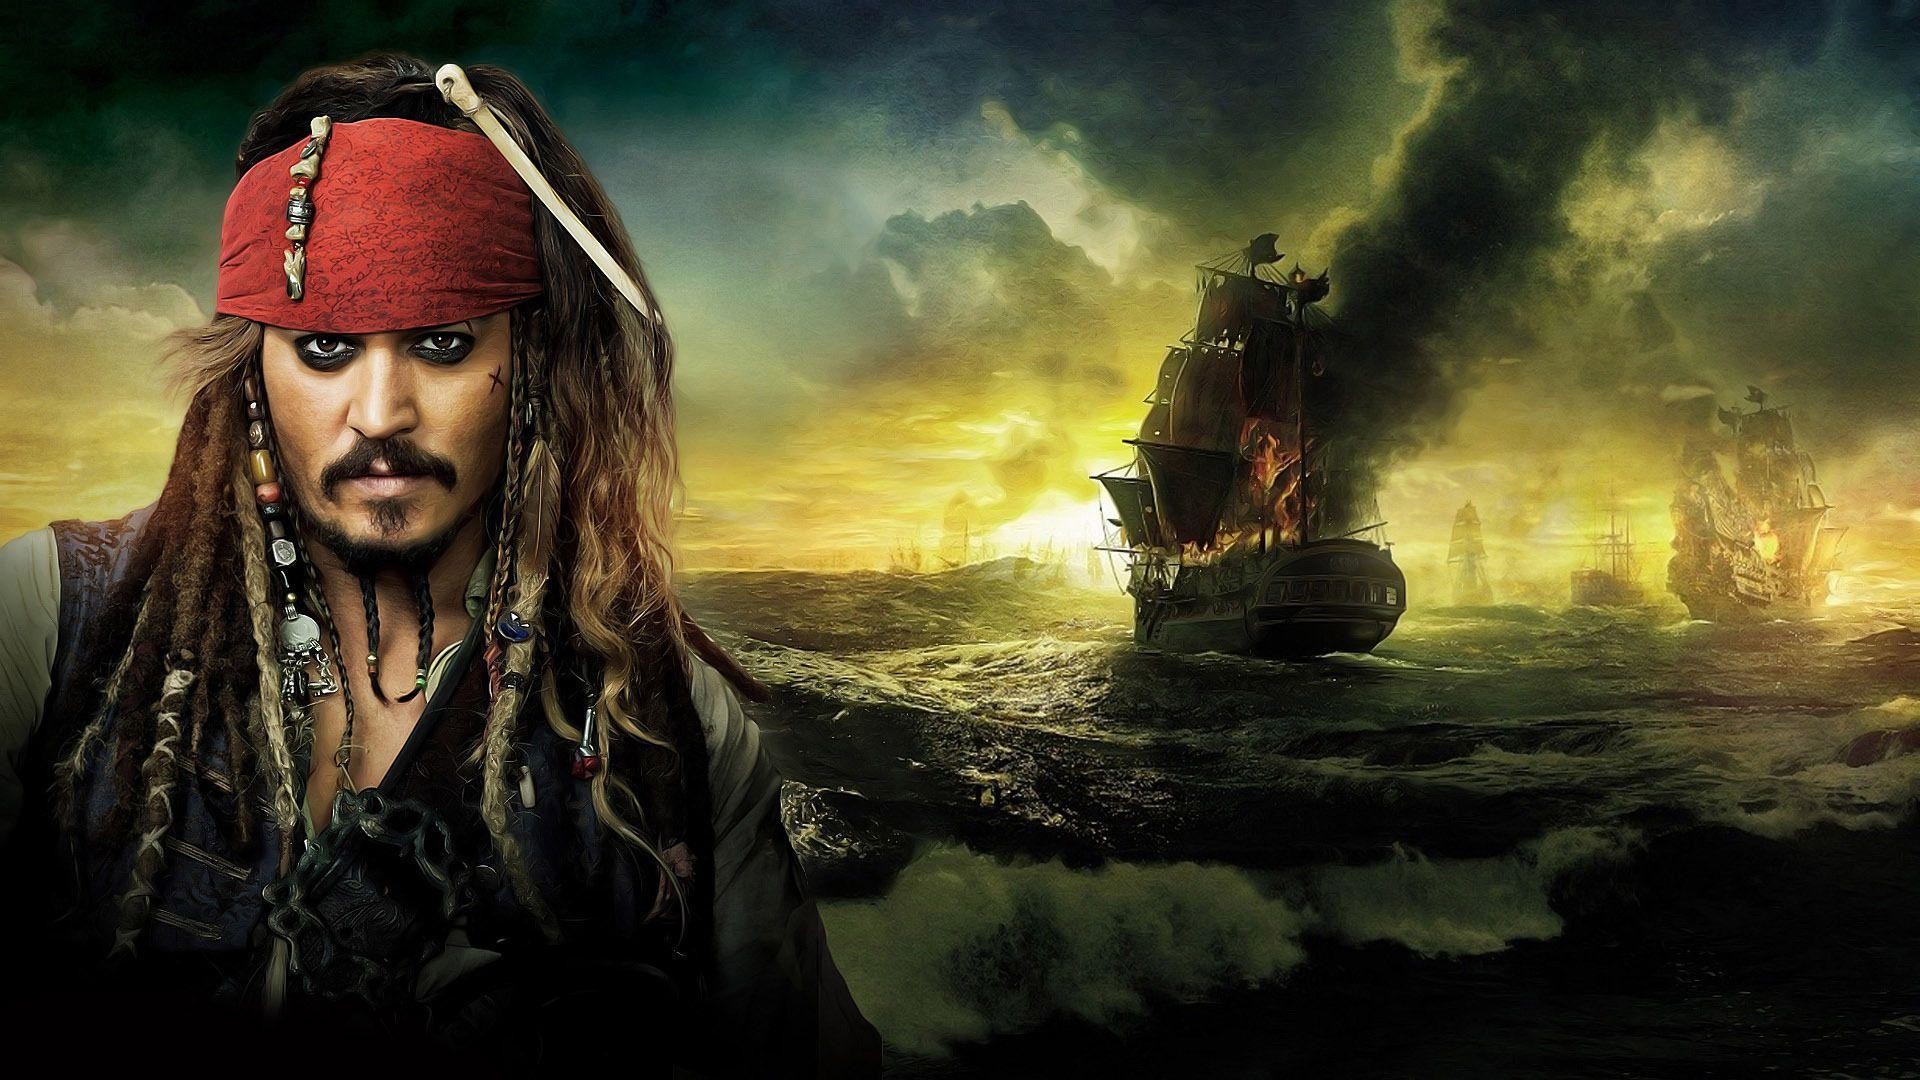 1920x1080 Pirates Of The Caribbean 5 Wallpapers HD #45148 Wallpaper .